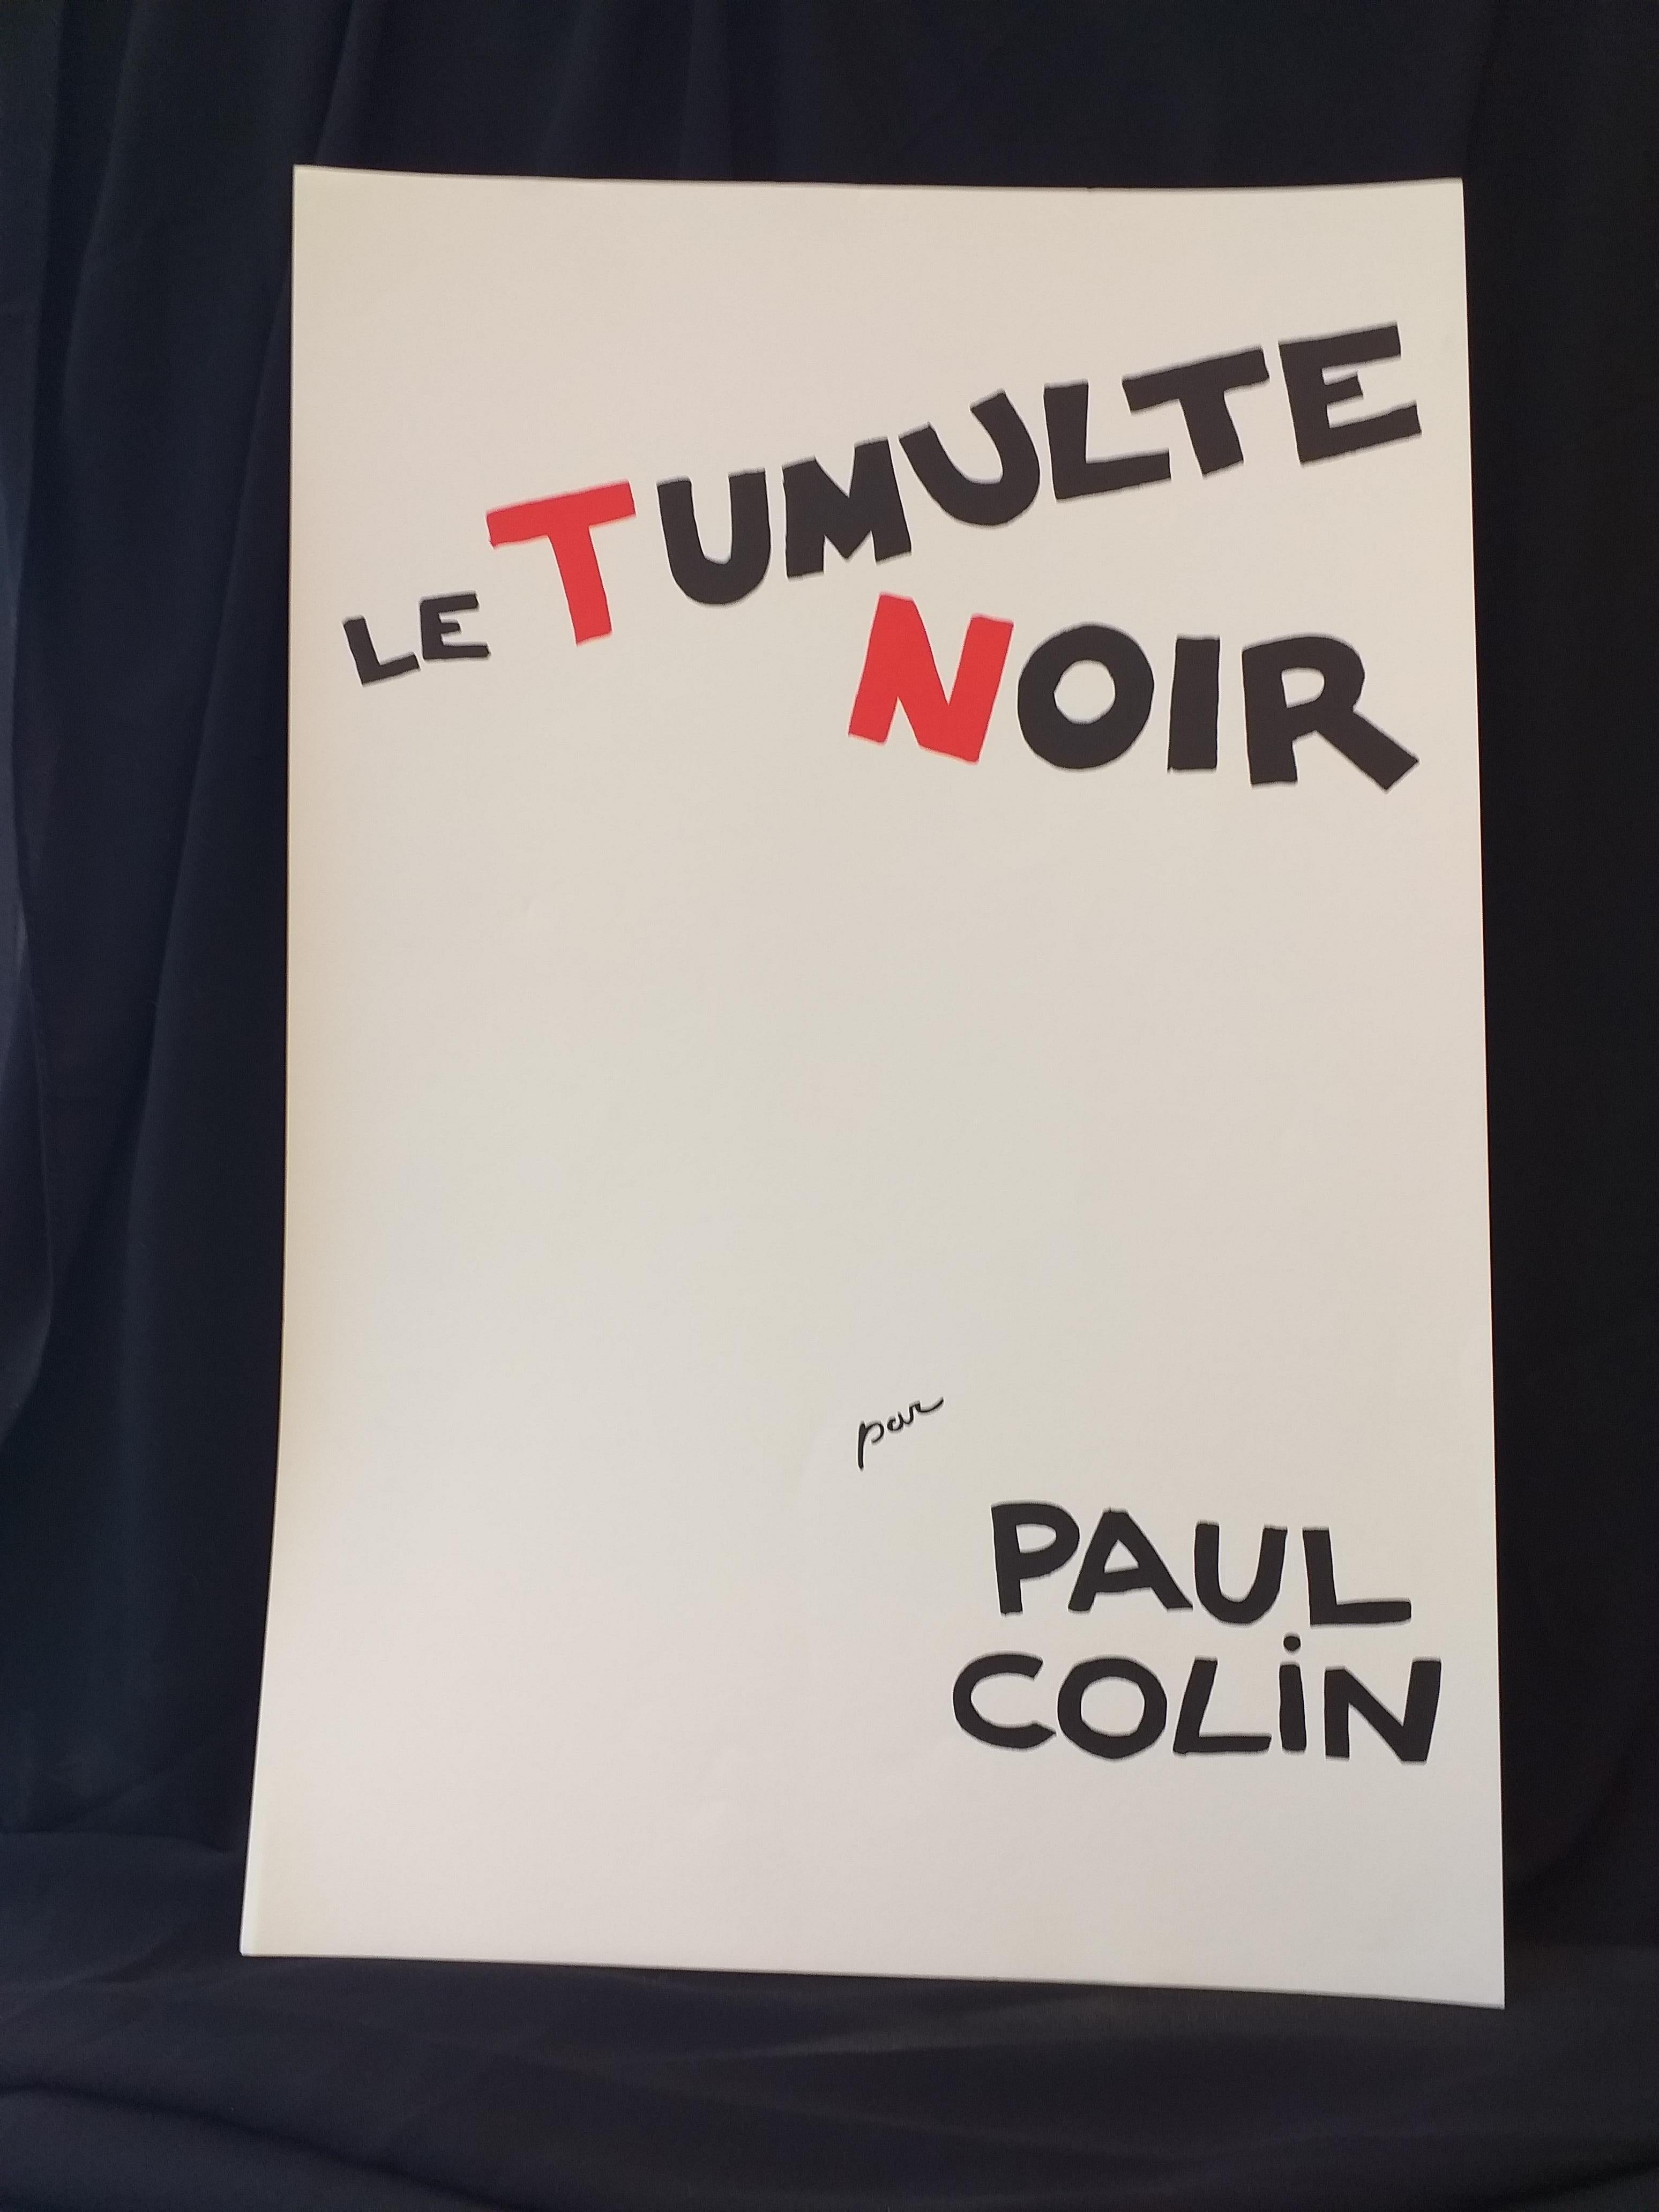 Paul Colin Poster artist
1892 - 1985
When the young Afro-American music-hall dancer Josephine Baker and the poster artist Paul Colin met during the rehearsals of the Revue Nègre
in Paris in 1925, both were still unknown to the general public. No